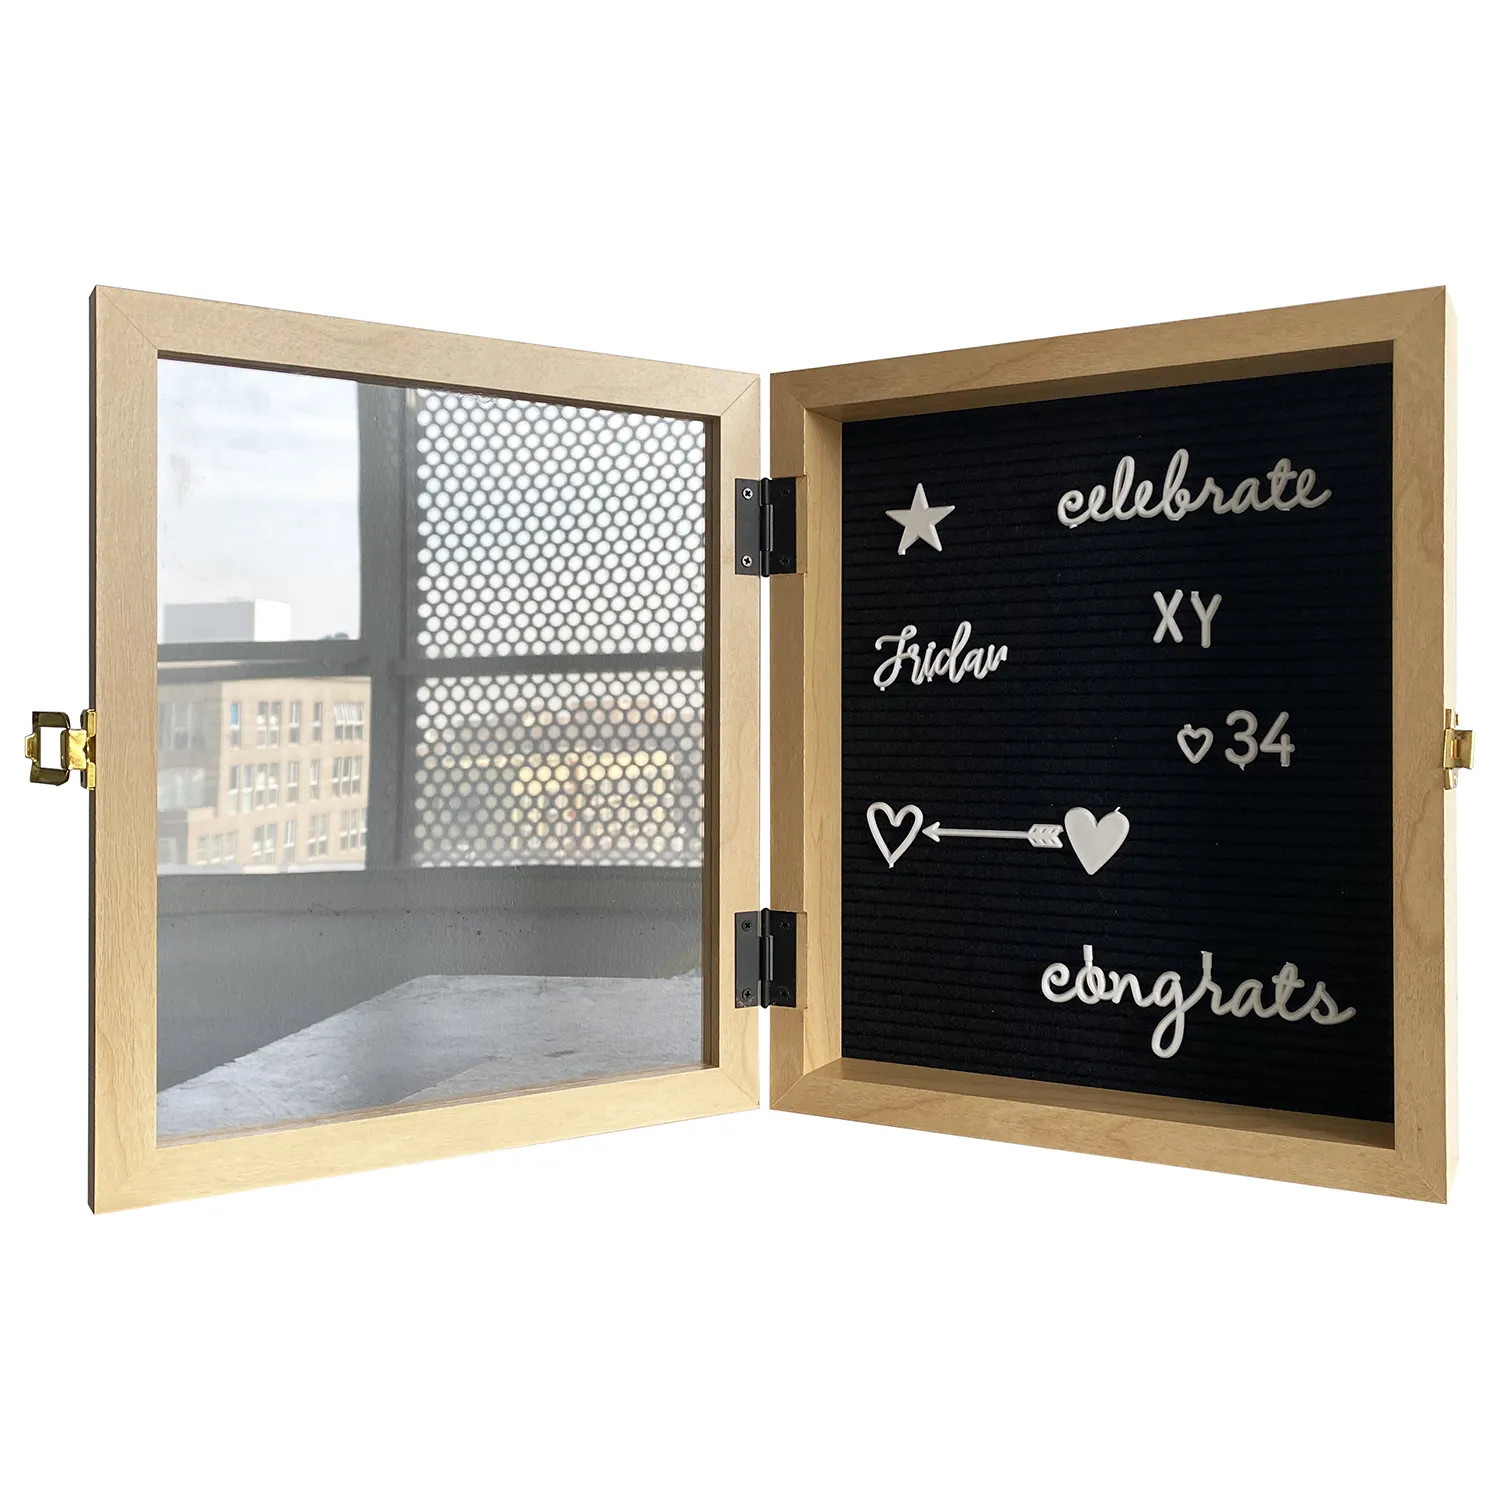 8 X 10inch Dark Wood Letter Board Solid Wood Frame Shadow Box With Changeable Plastic Letters For Home Decor